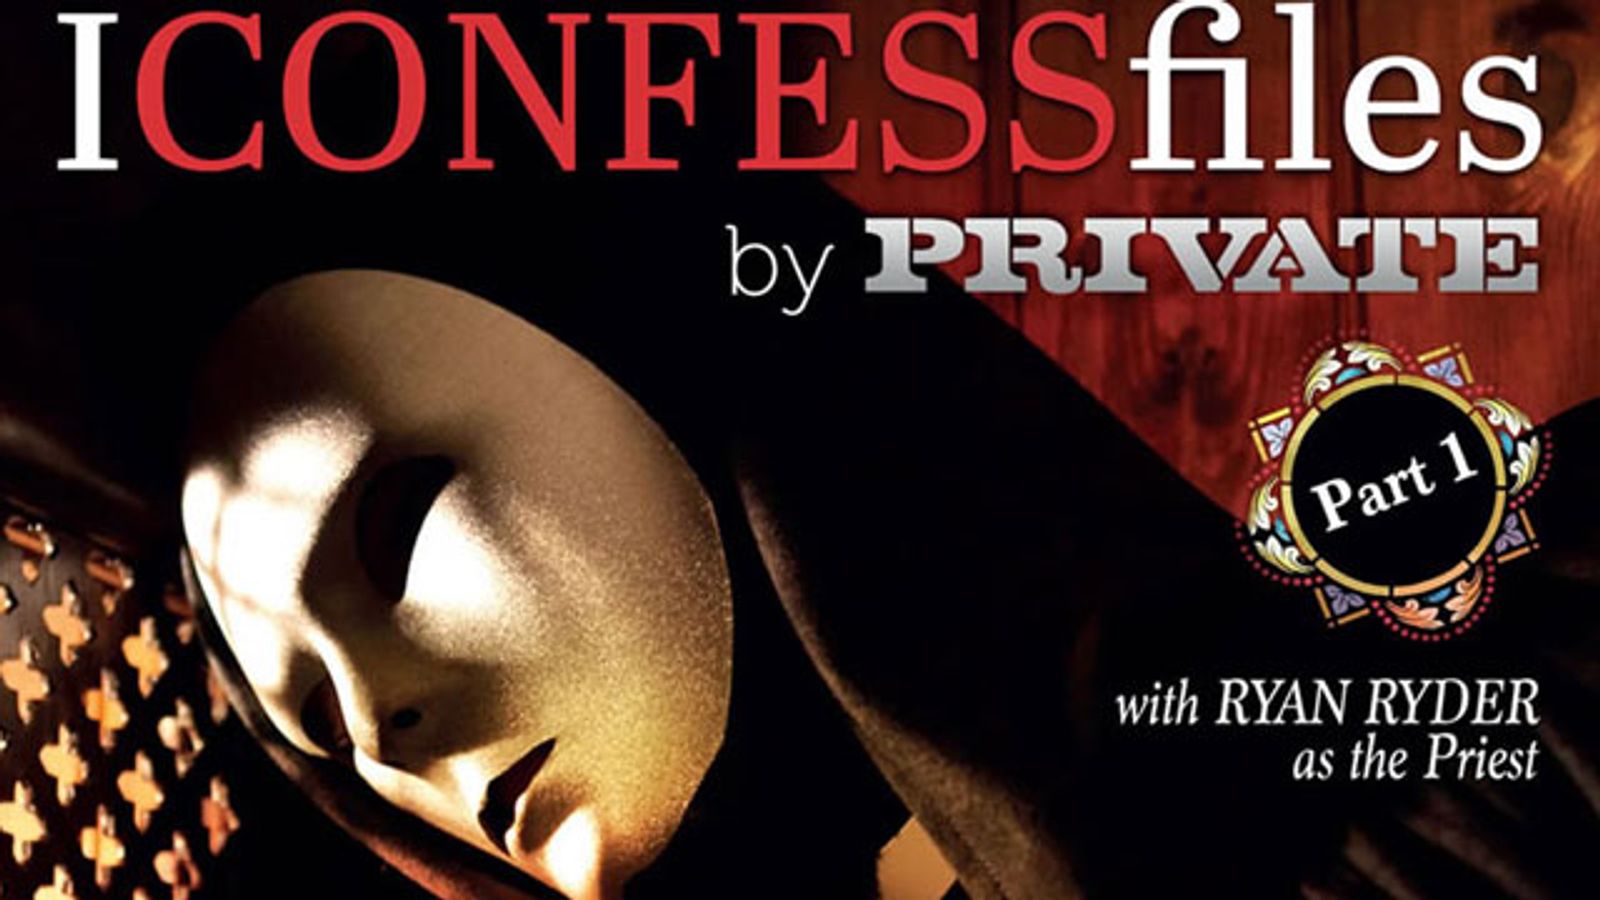 Euro-Gals Seek Absolution in Private's 'I Confess Files'